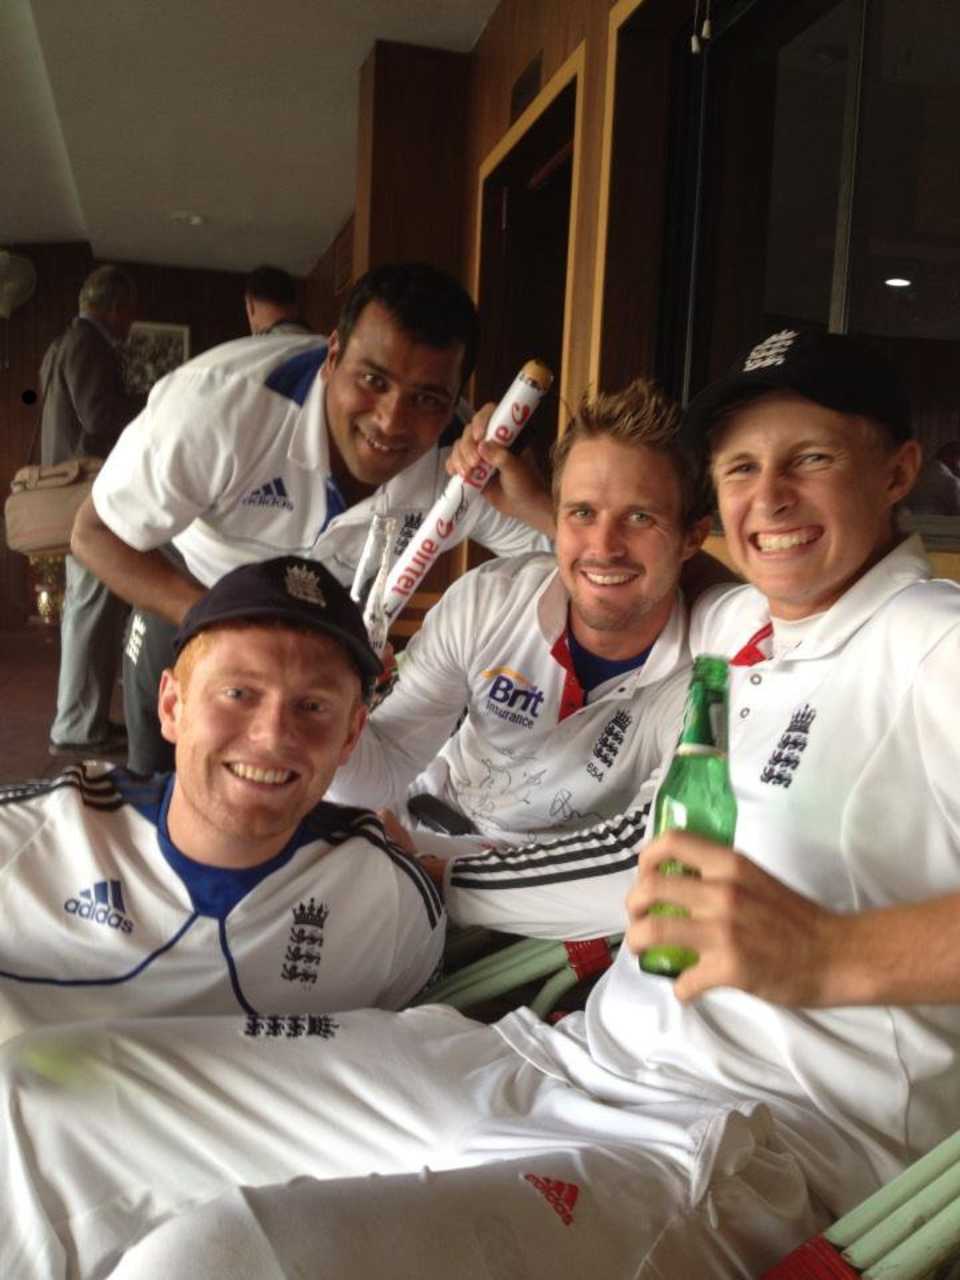 Nick Compton, Joe Root, Samit Patel and Jonny Bairstow relax after victory